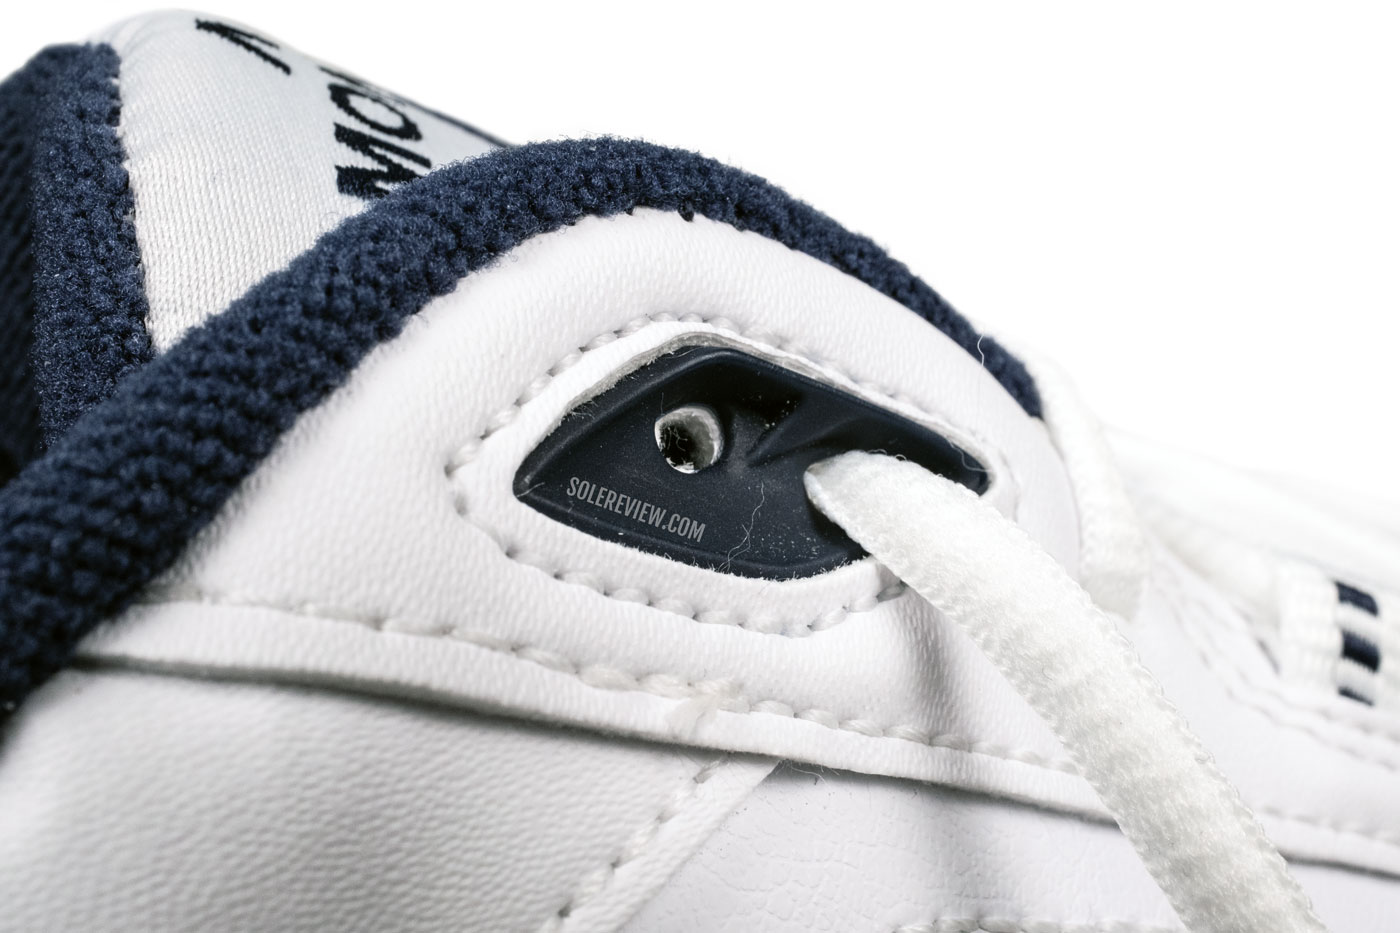 The plastic eyelet of the Nike Monarch IV.